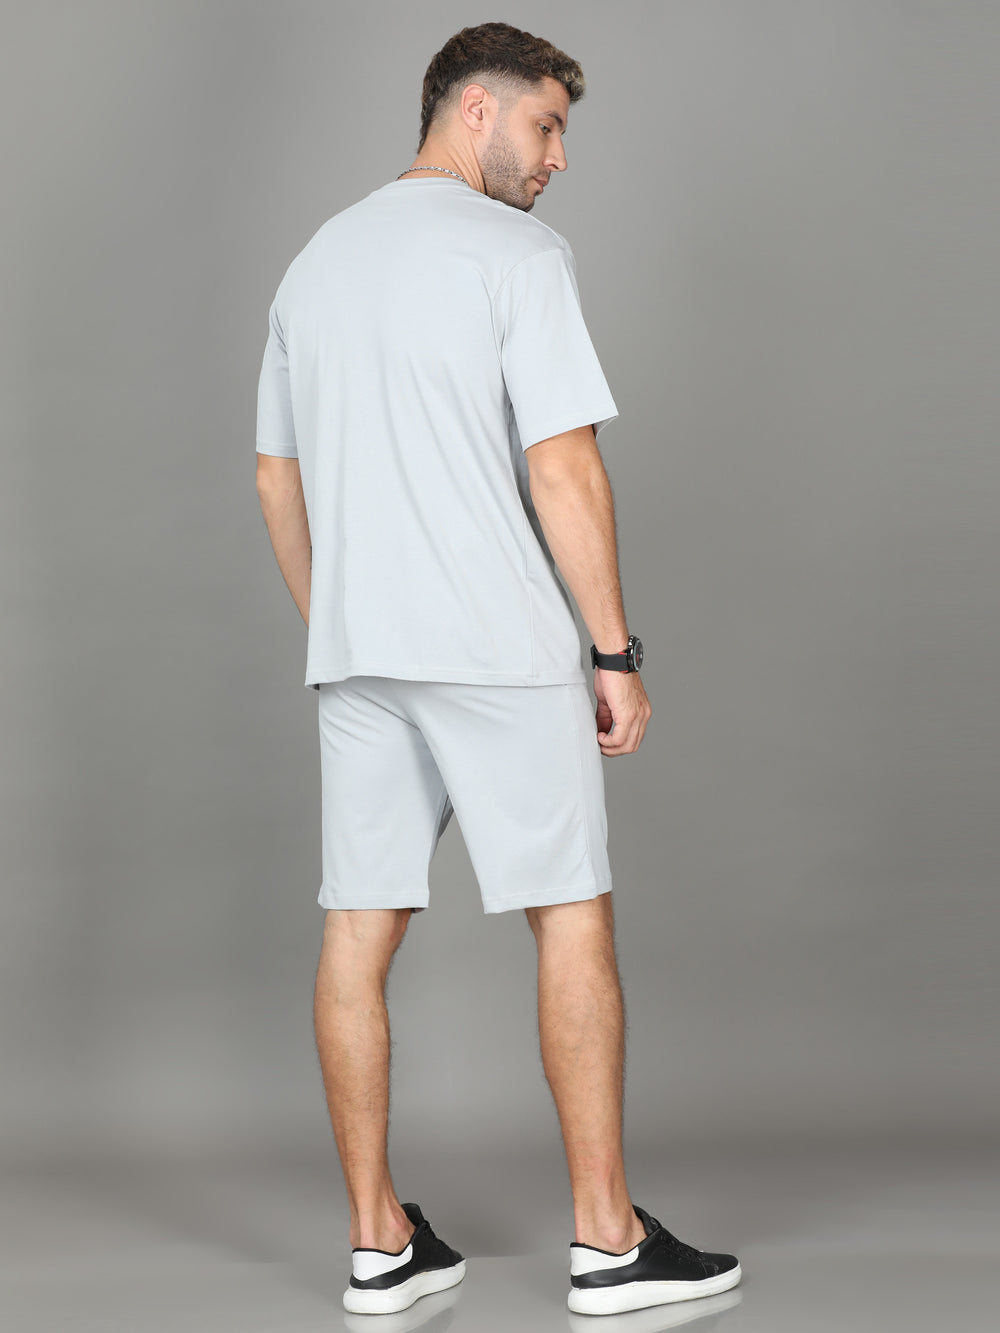 Limited Edition Repose Grey Oversize Co-ords Oversize Co-ords Bushirt   